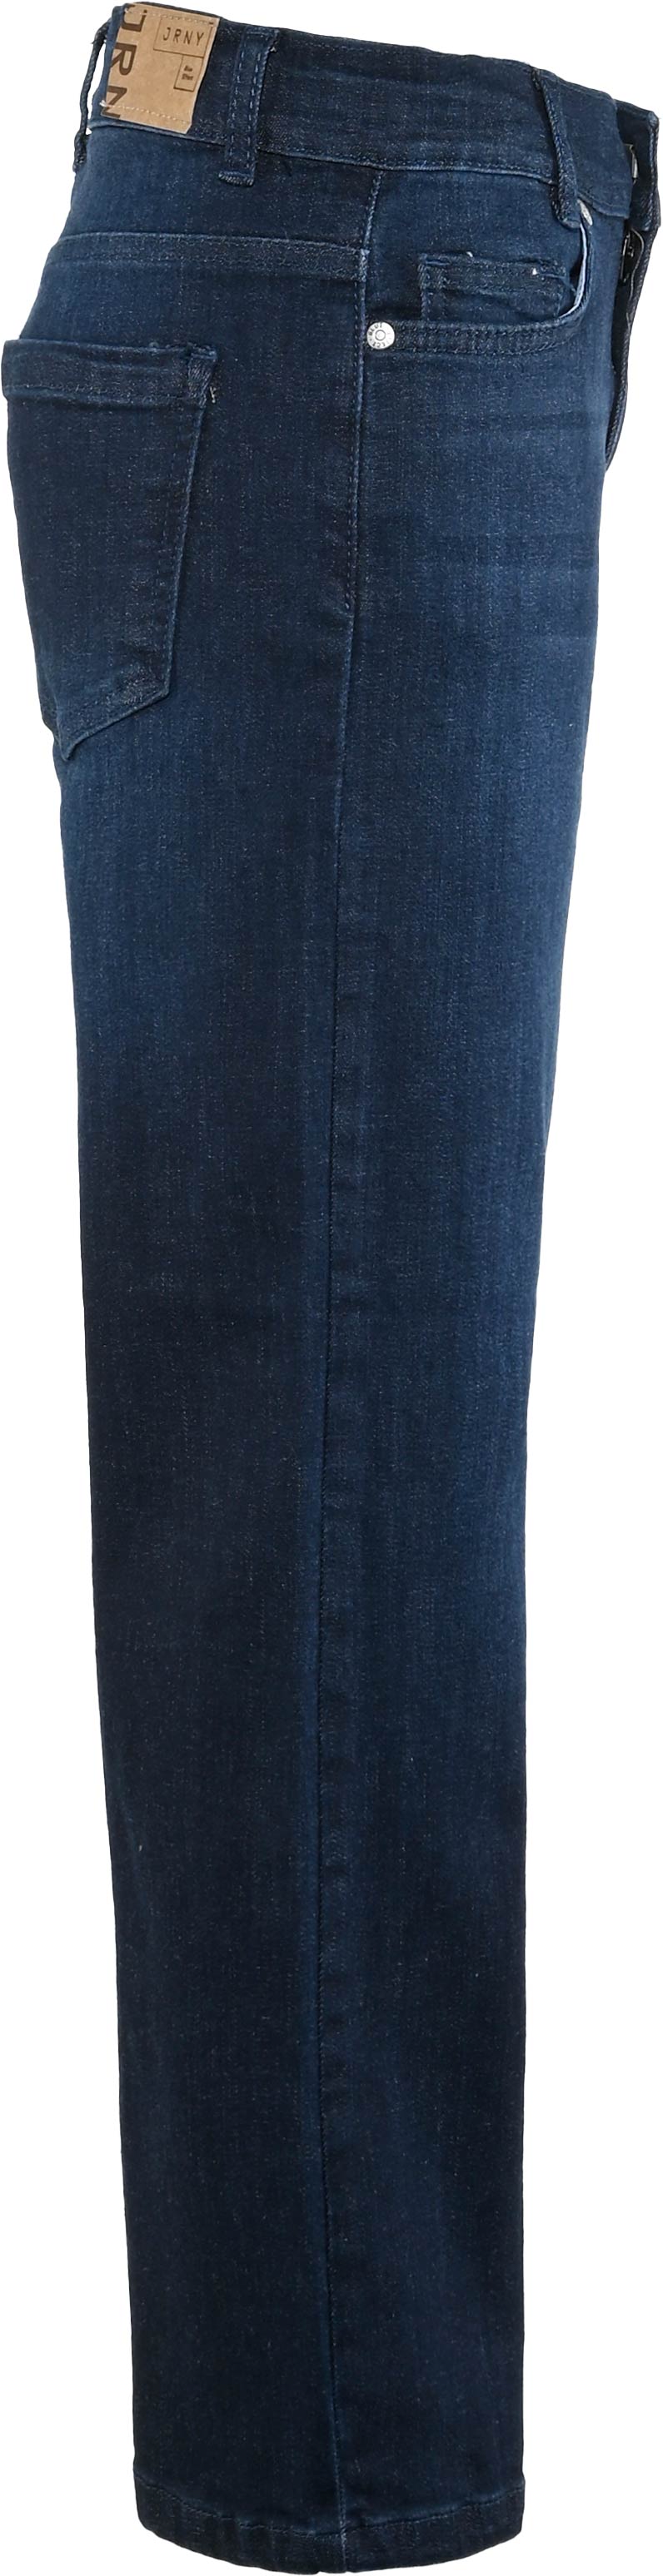 1401-JRNY Wide Leg Jeans Girls, Straight Cut, available in Normal